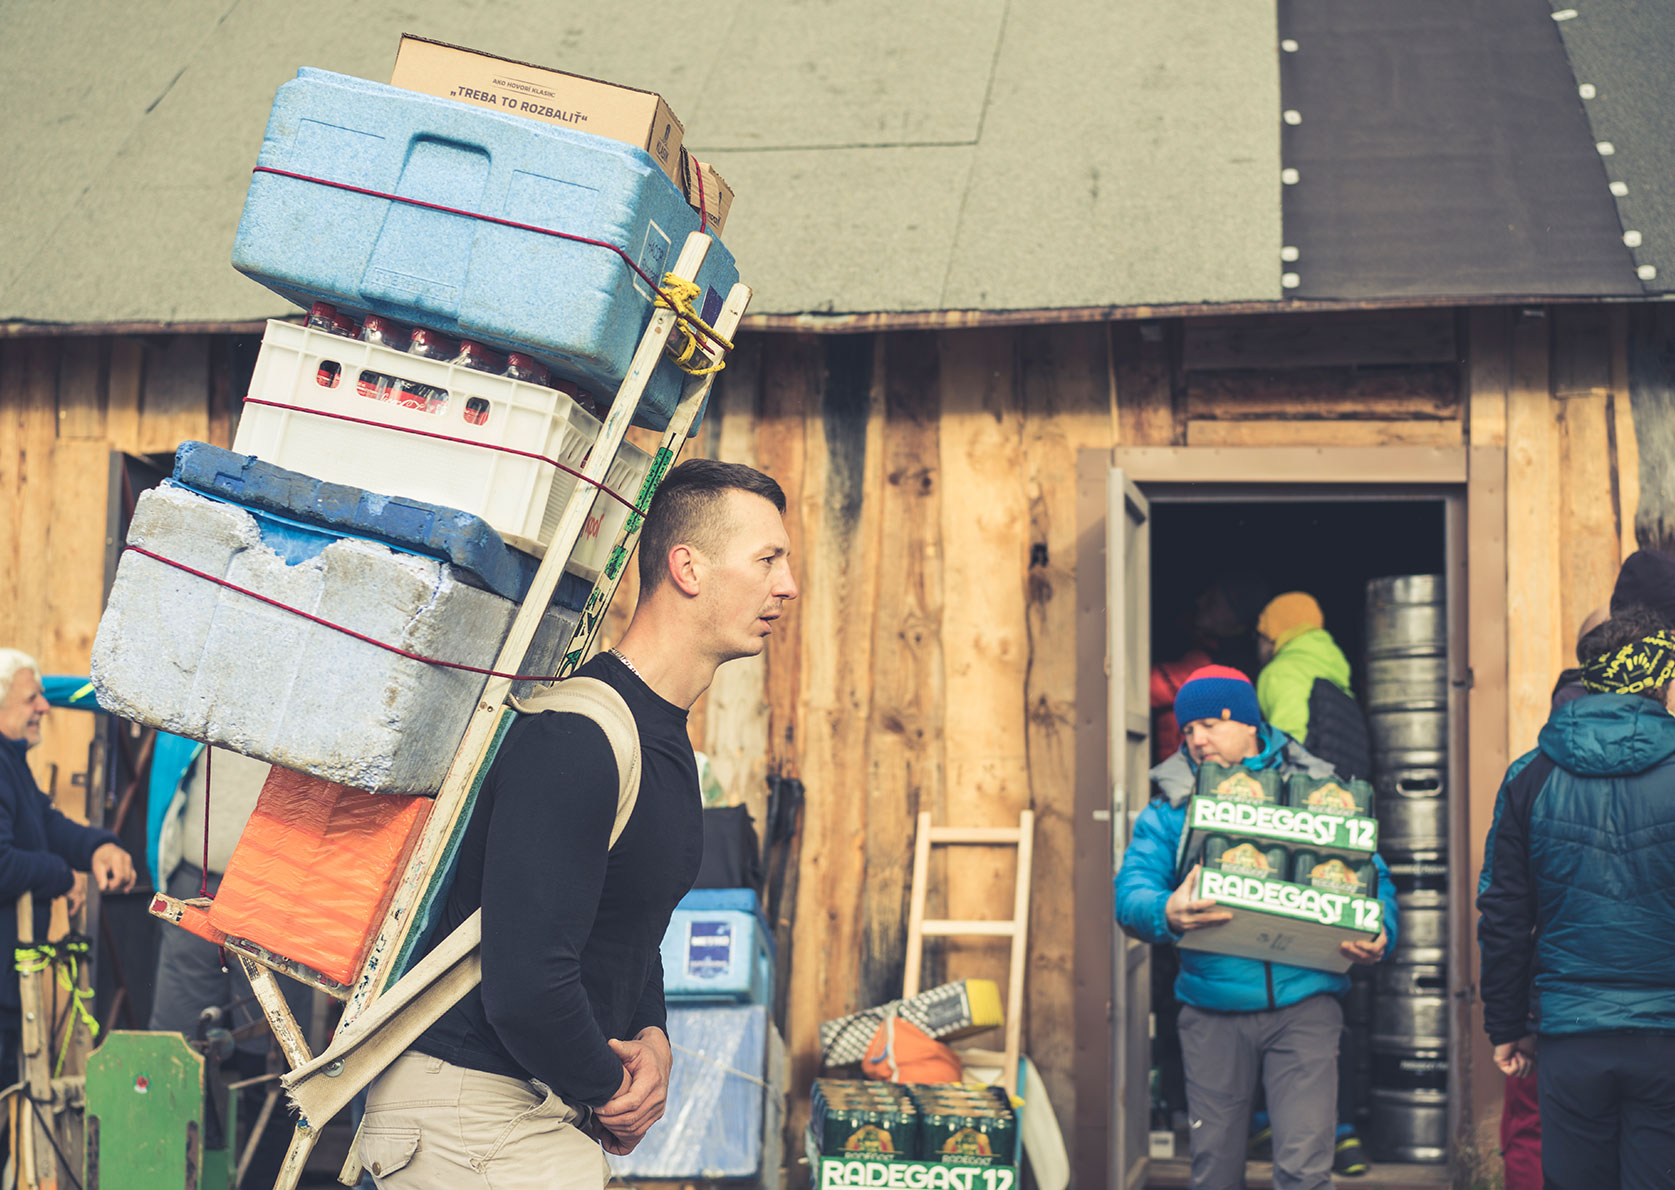 At the wooden hut that serves as a warehouse, the Tatra sherpas load their frame packs with barrels and boxes.